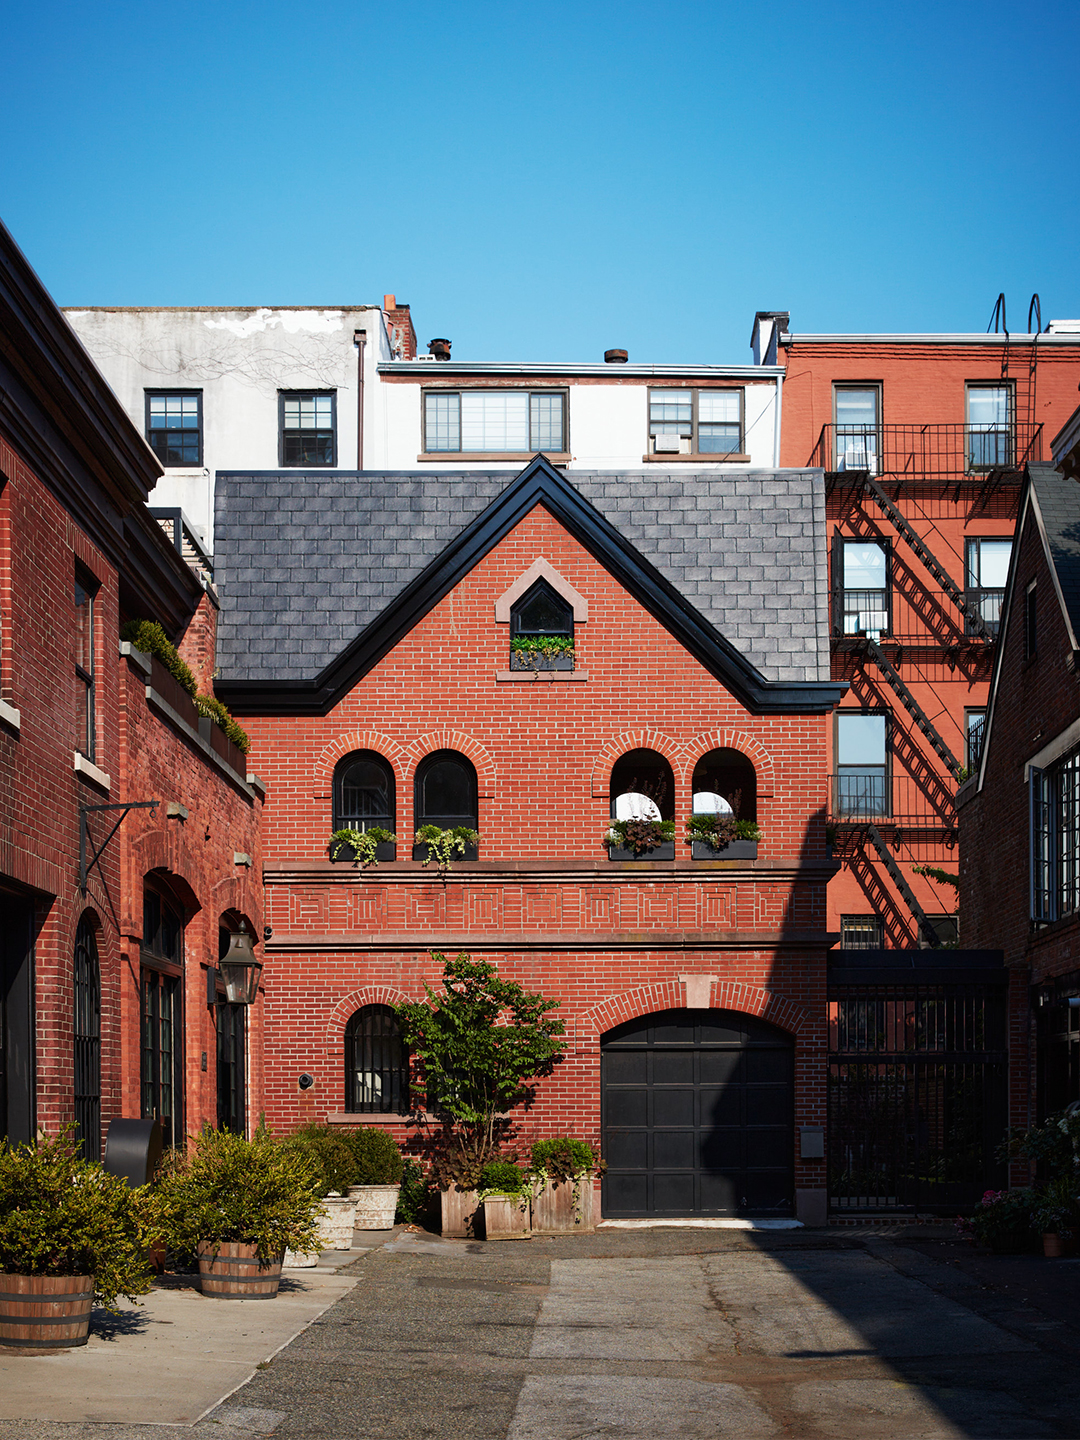 Once Upon a Time, This Sunny Brooklyn Heights Home Was a Stable